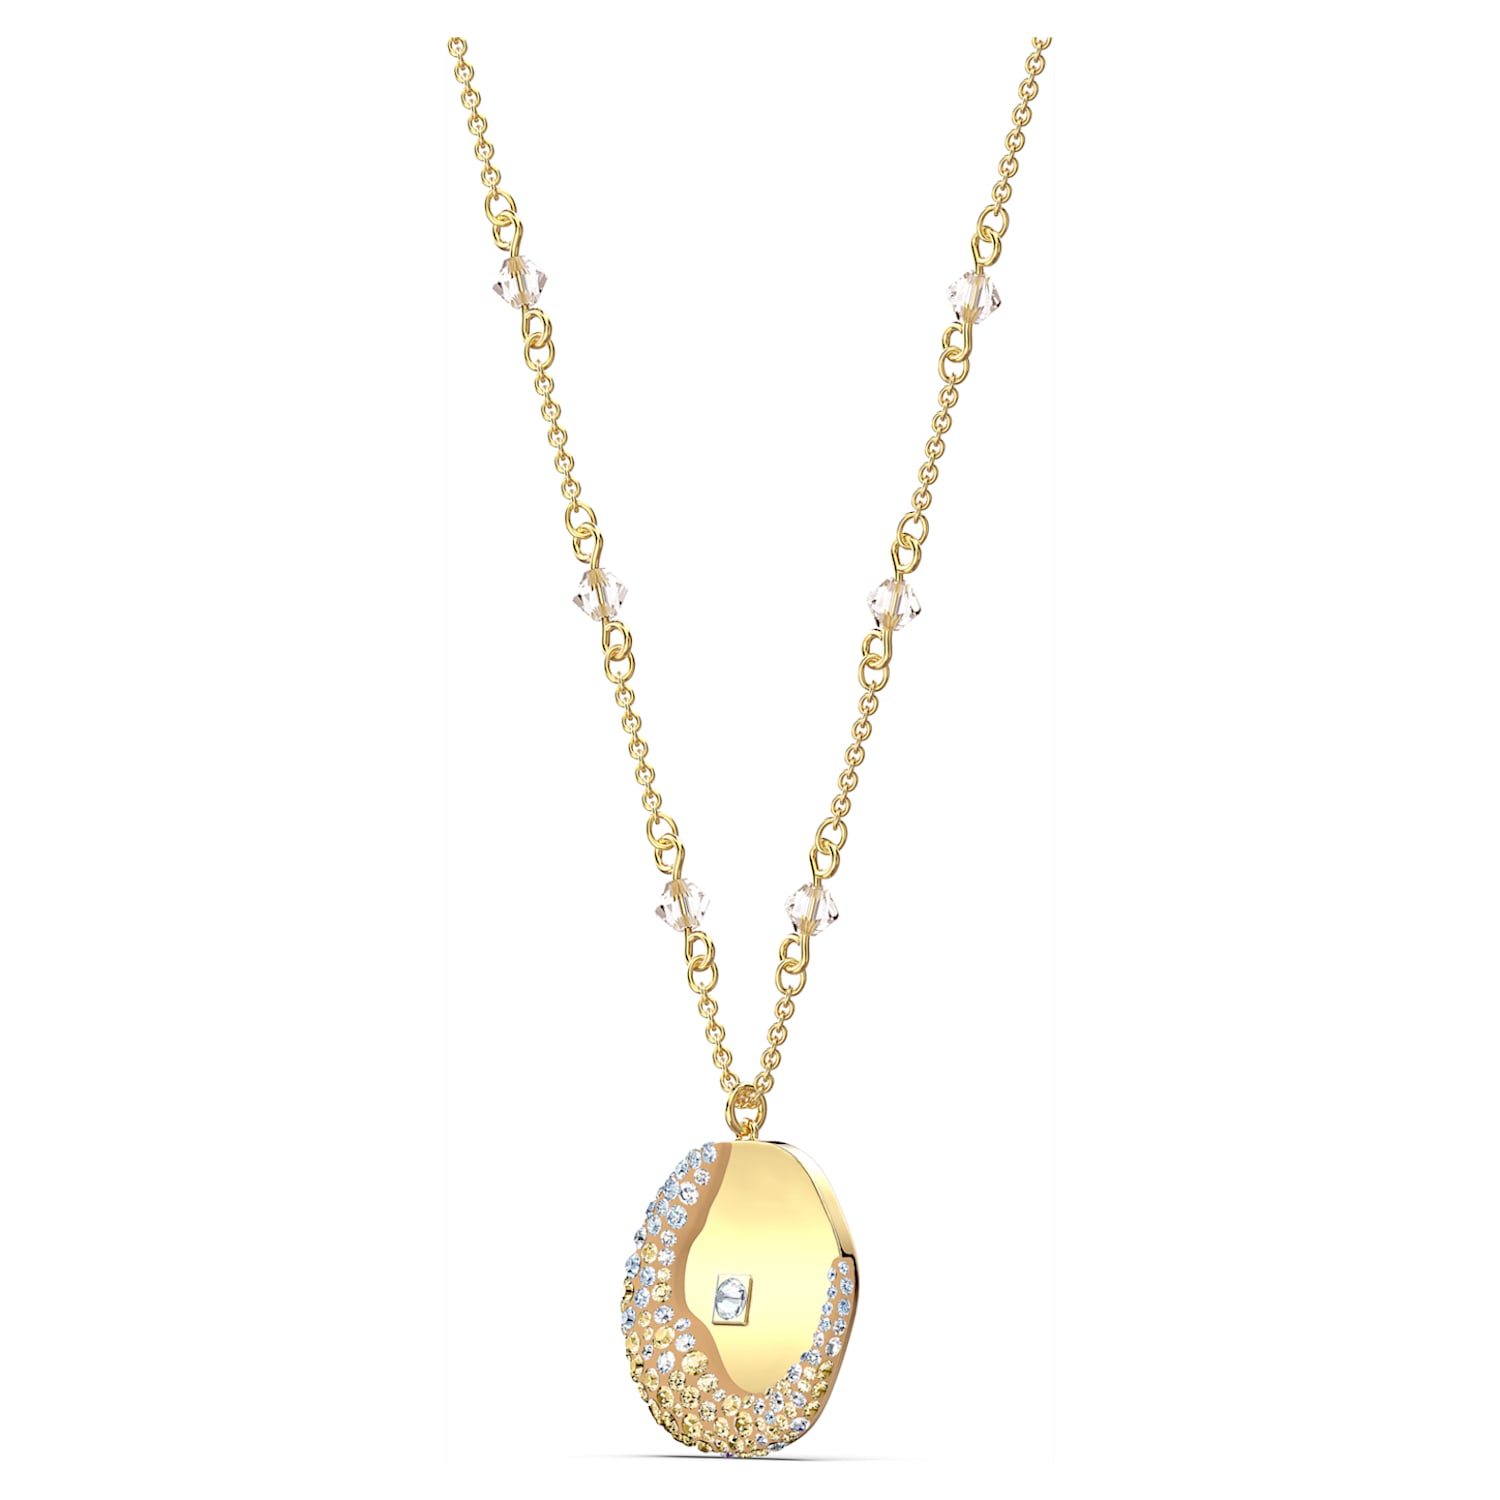 The Elements pendant, Air element, Yellow, Gold-tone plated